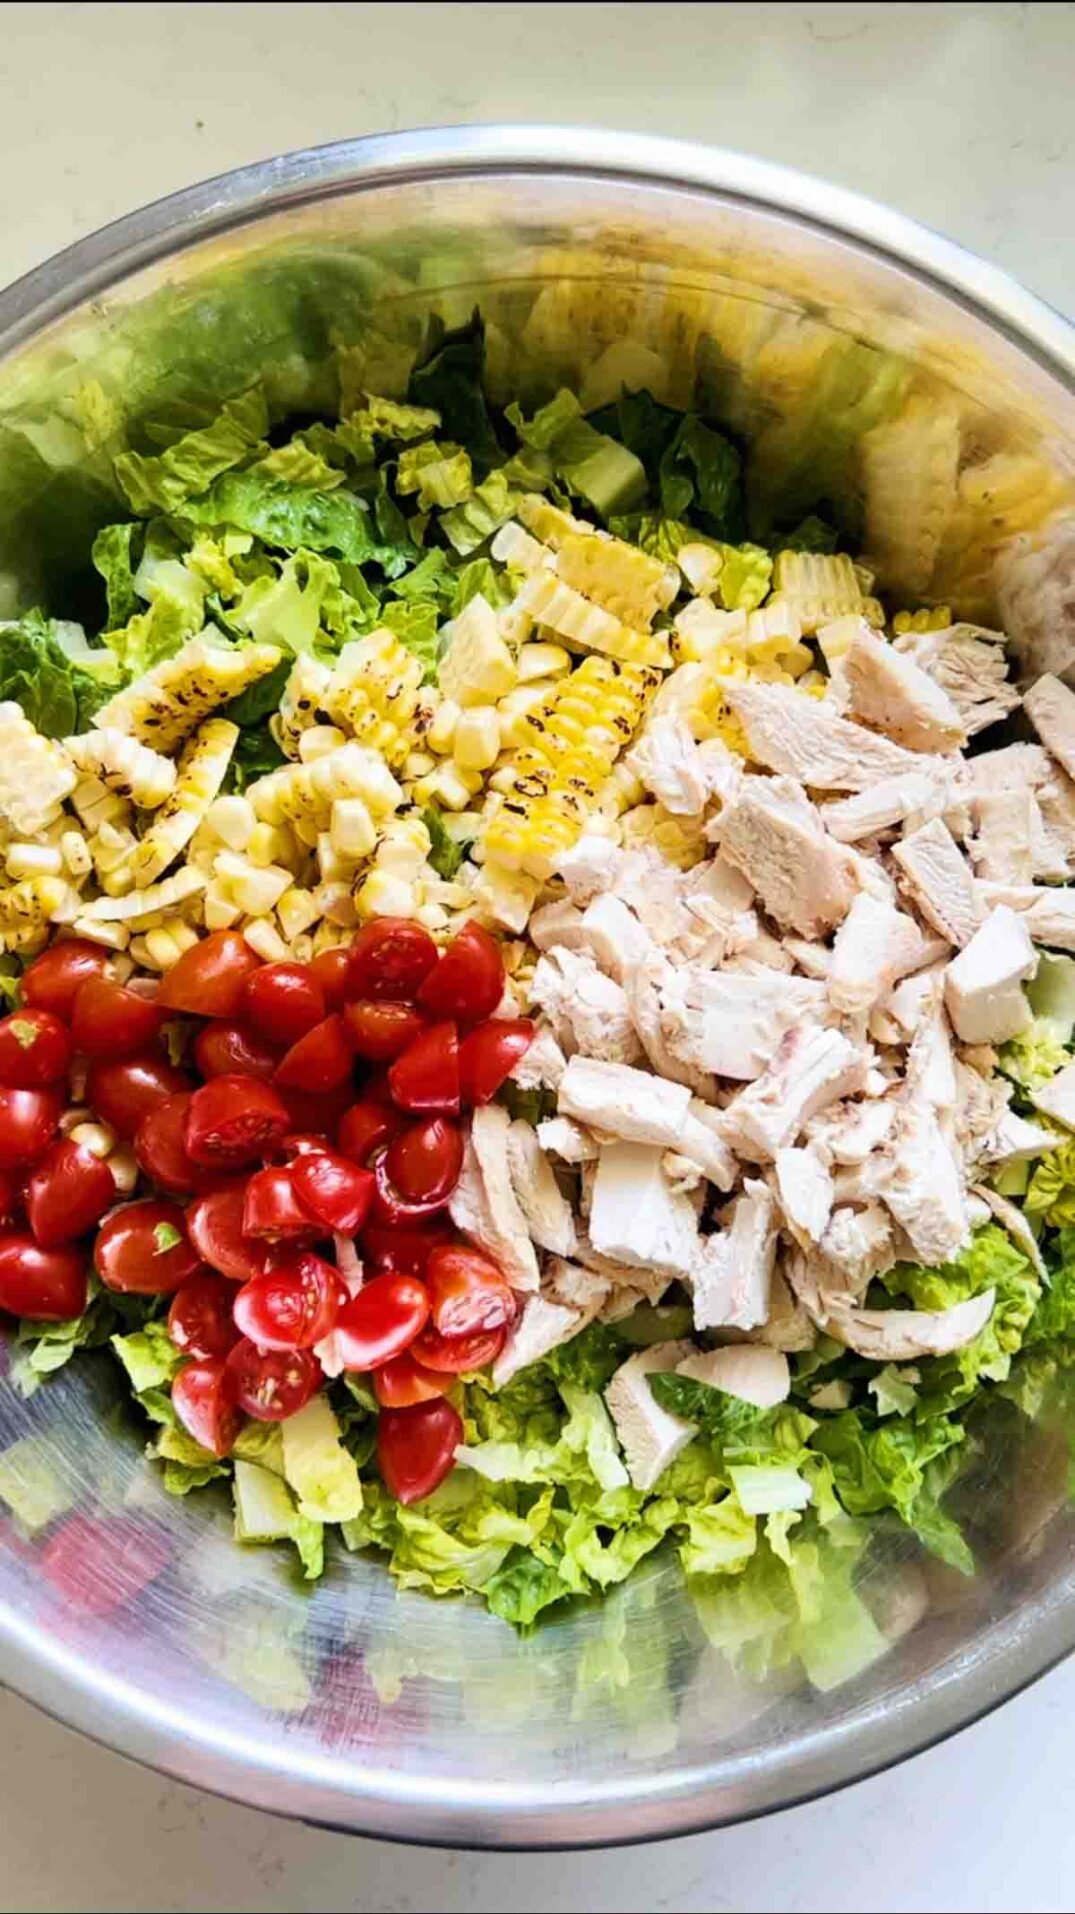 romaine lettuce, rotisserie chicken, tomatoes and grilled corn in a big silver bowl on a white surface.